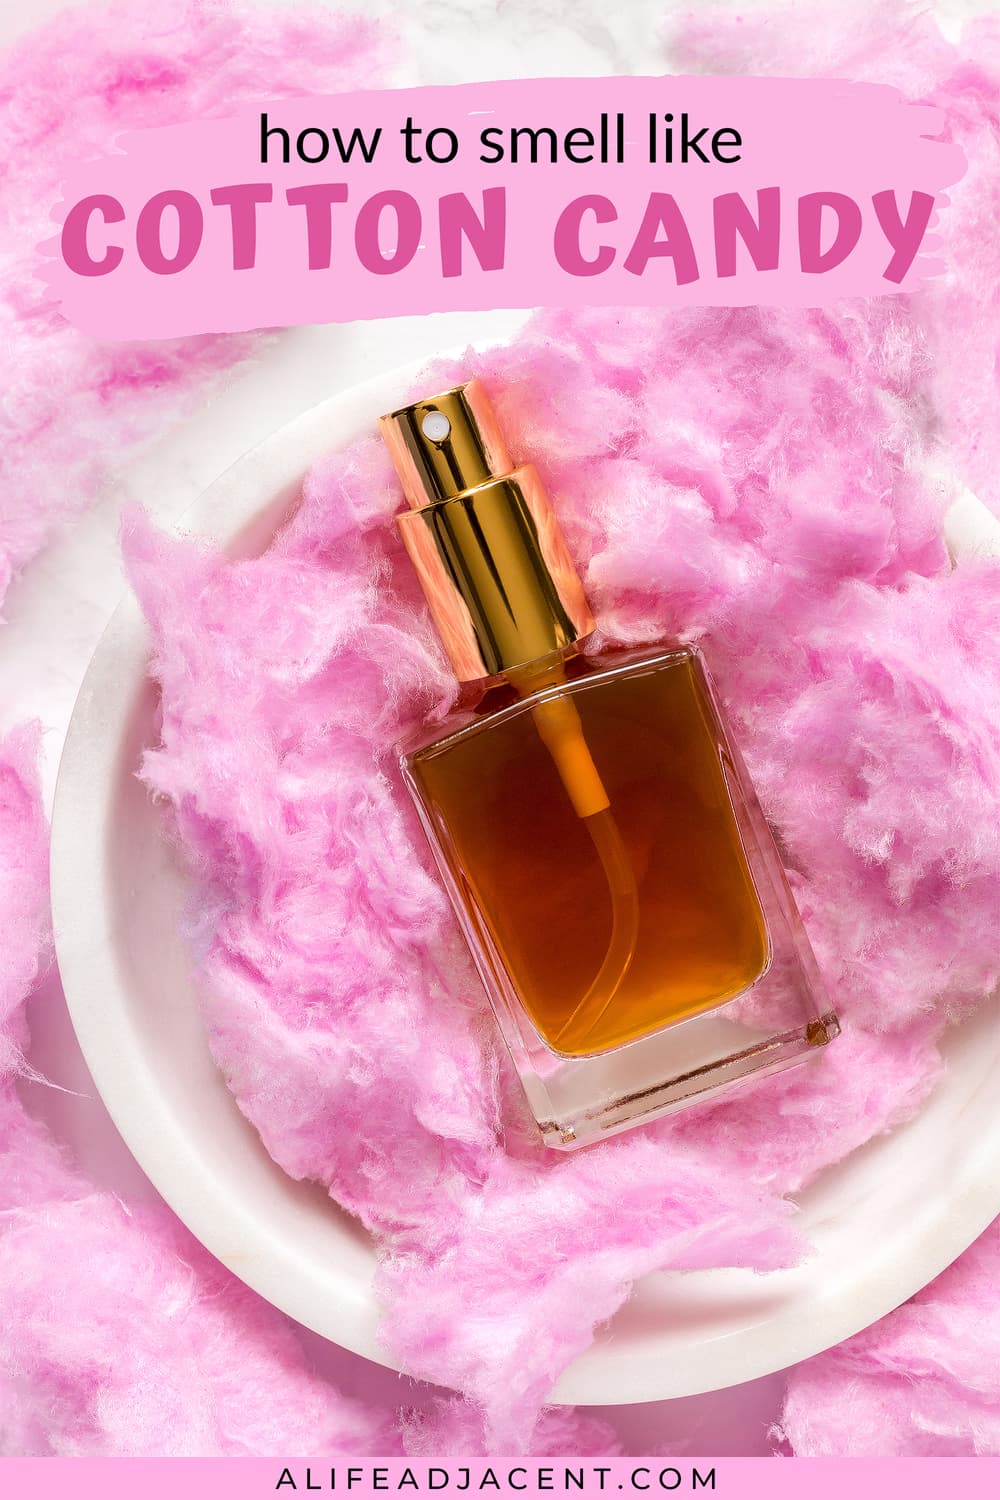 How to Smell Like Cotton Candy – Perfume DIY